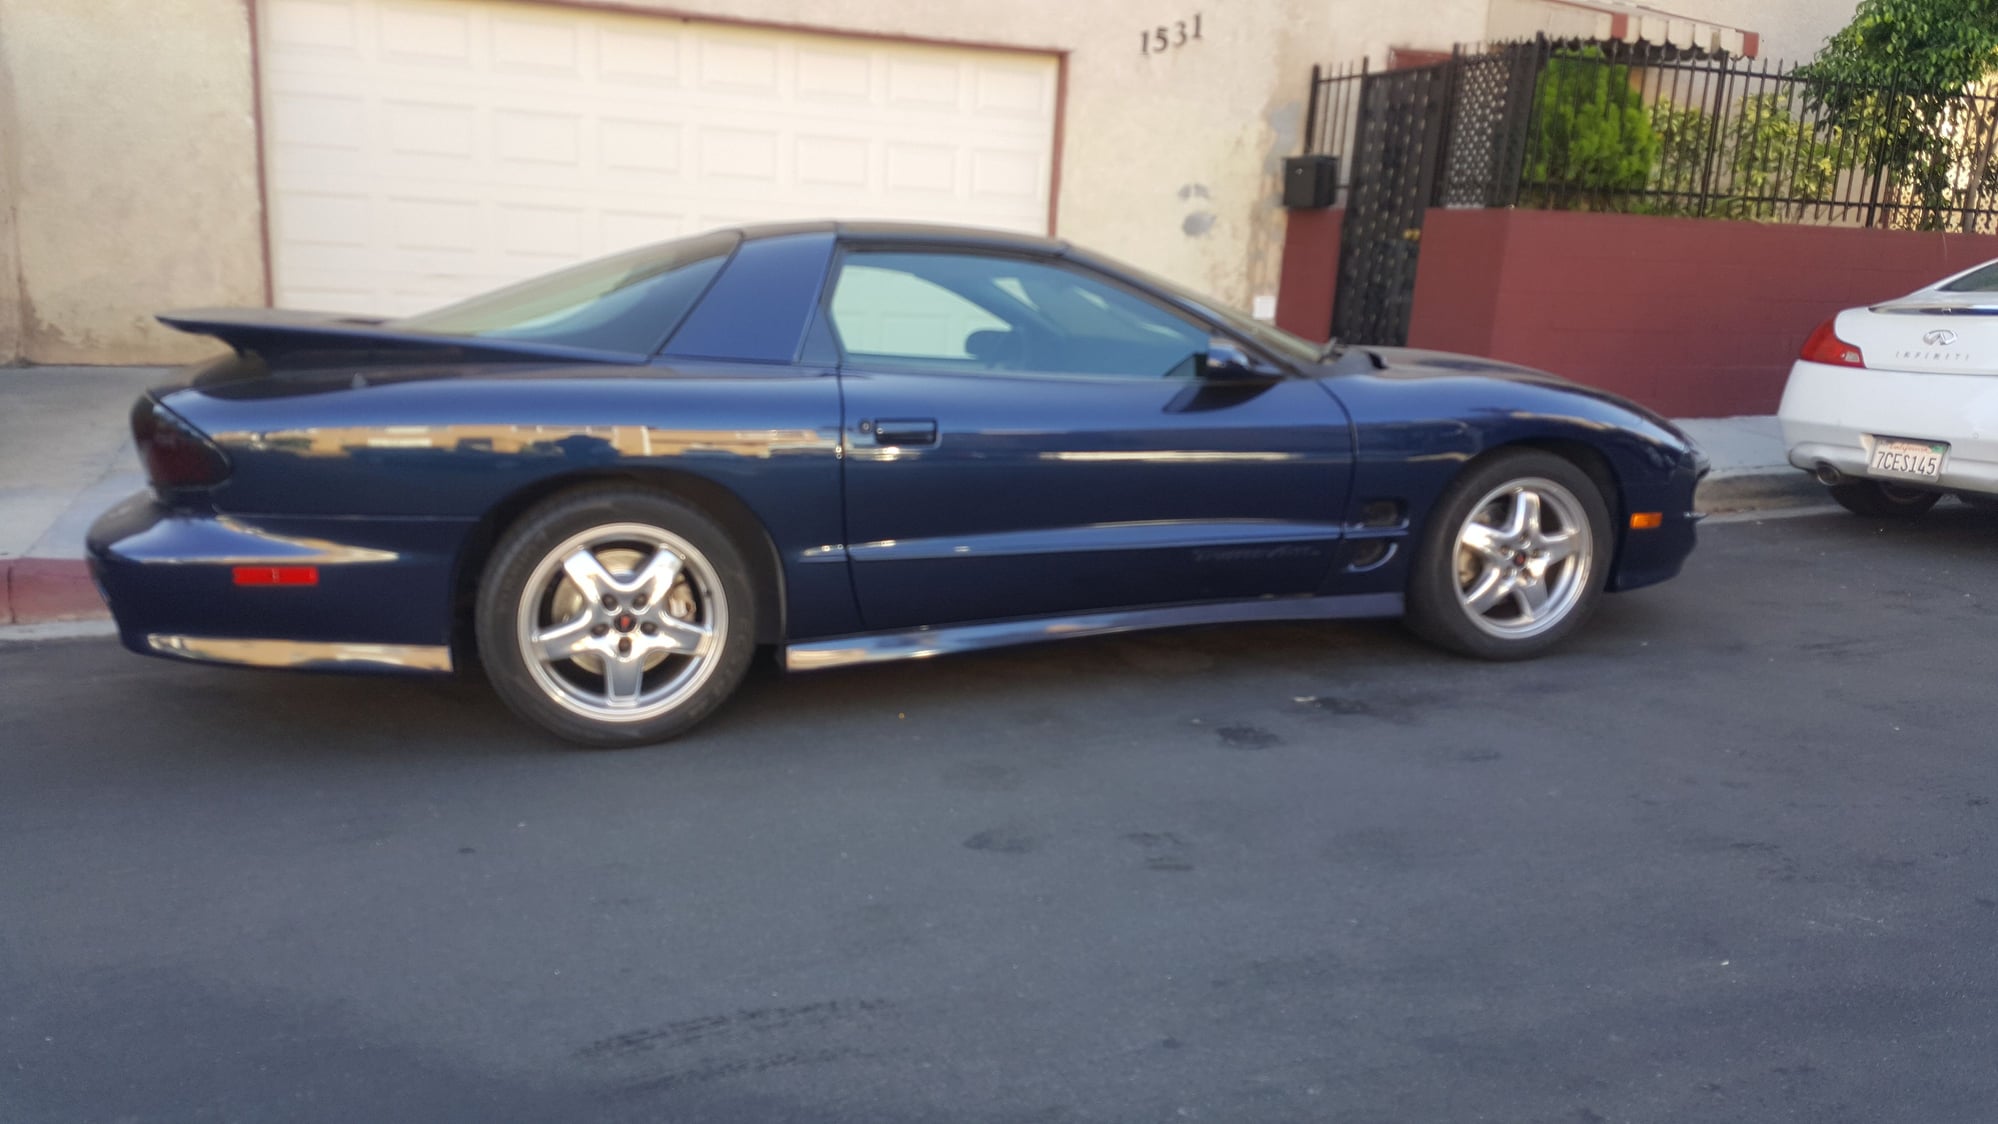 2002 Pontiac Firebird - 48K Mile WS-6 - Used - VIN 2G2FV22GX22162824 - 47,850 Miles - 8 cyl - 2WD - Manual - Coupe - Blue - Hollywood, CA 90028, United States